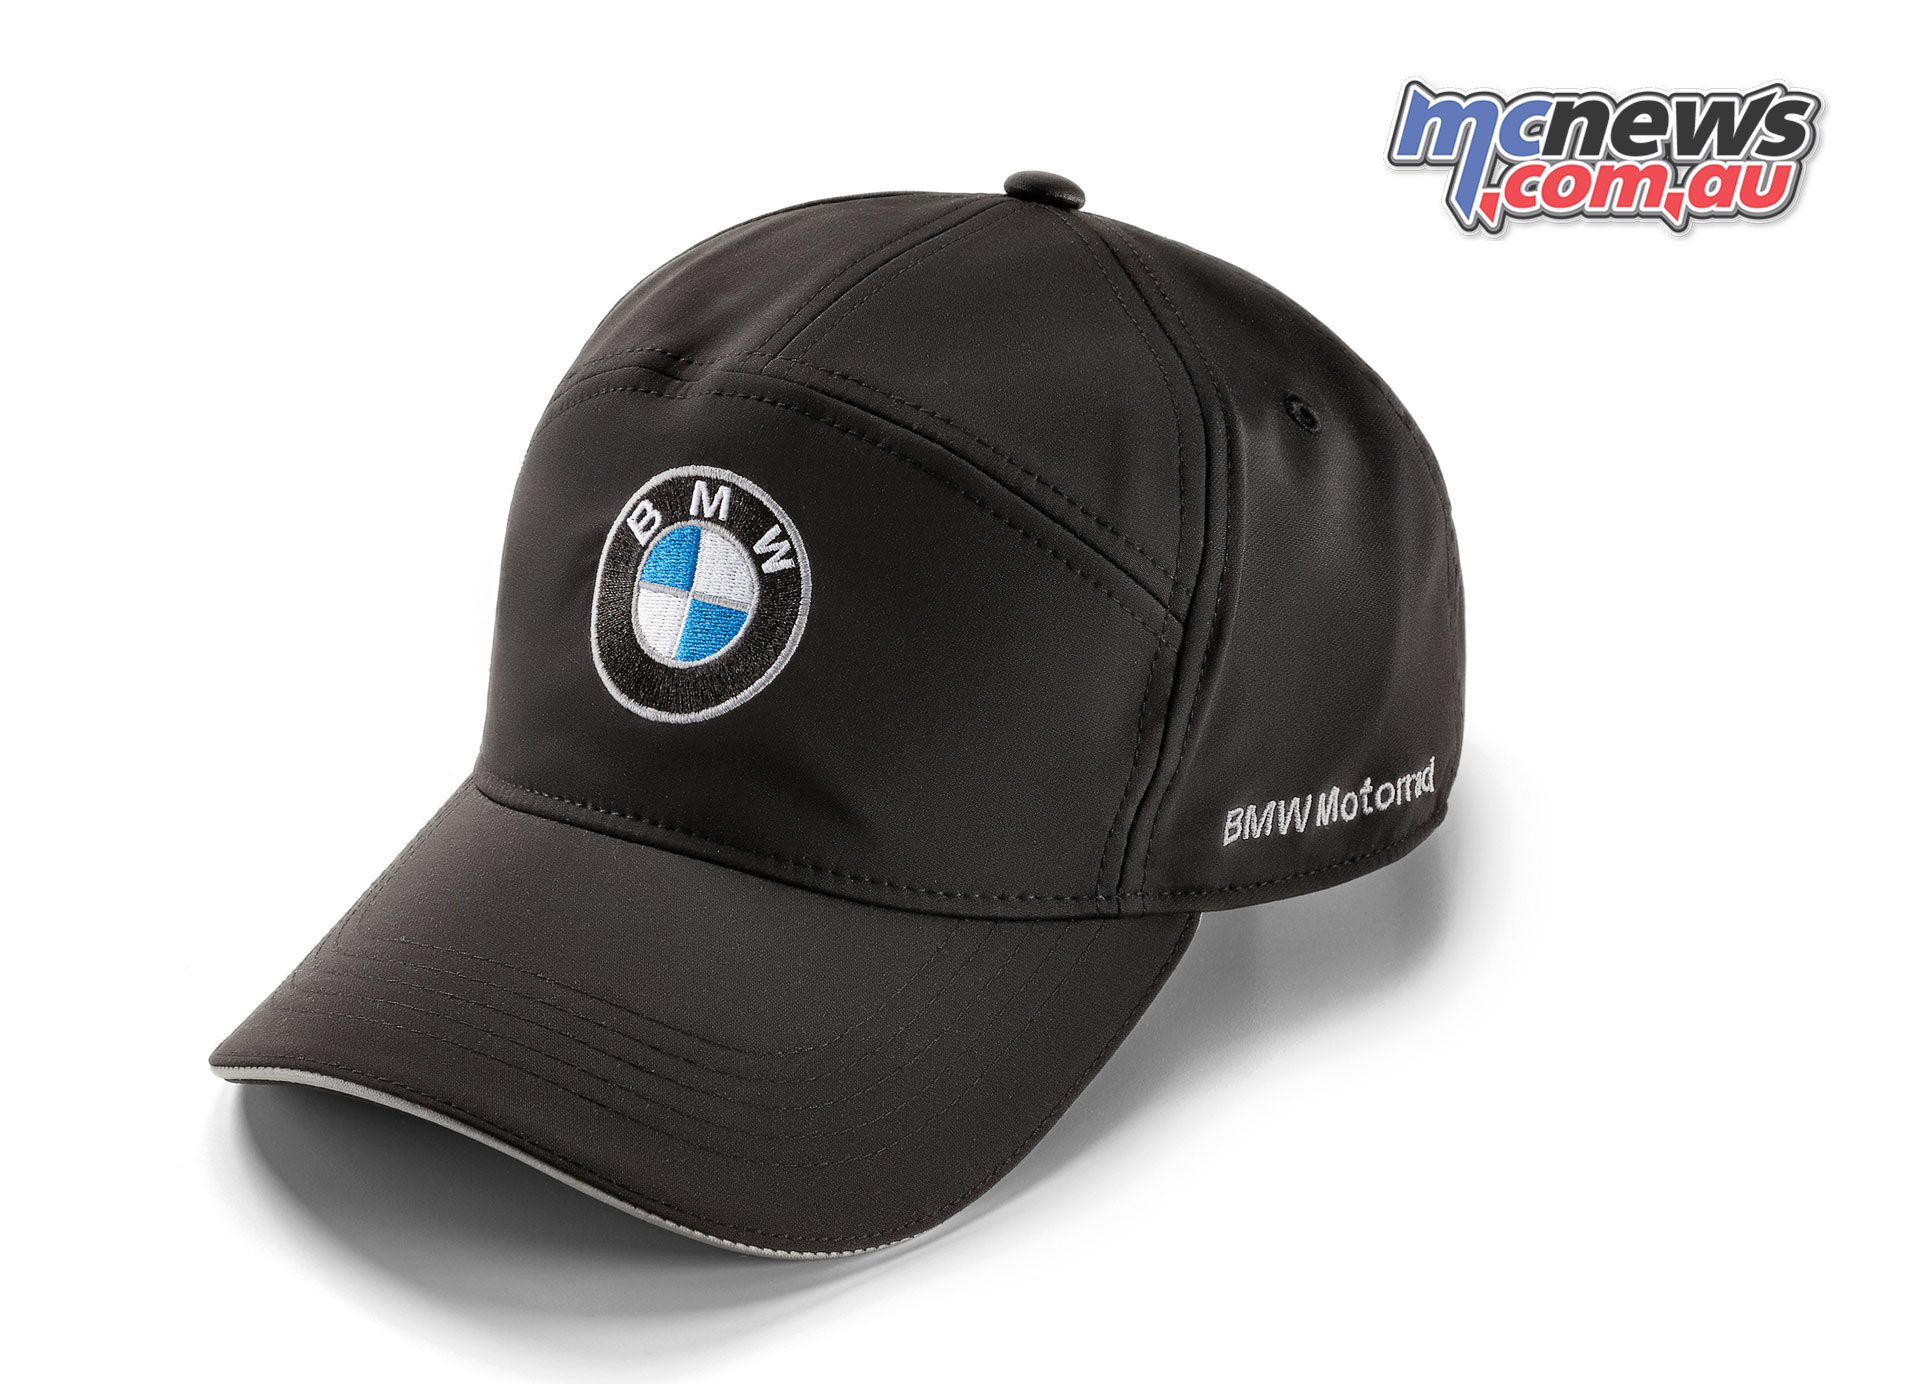 Chefcap New Embroidered with R1250GS for BMW Motorrad Fans Cap Biker Shirt Bike Hat 